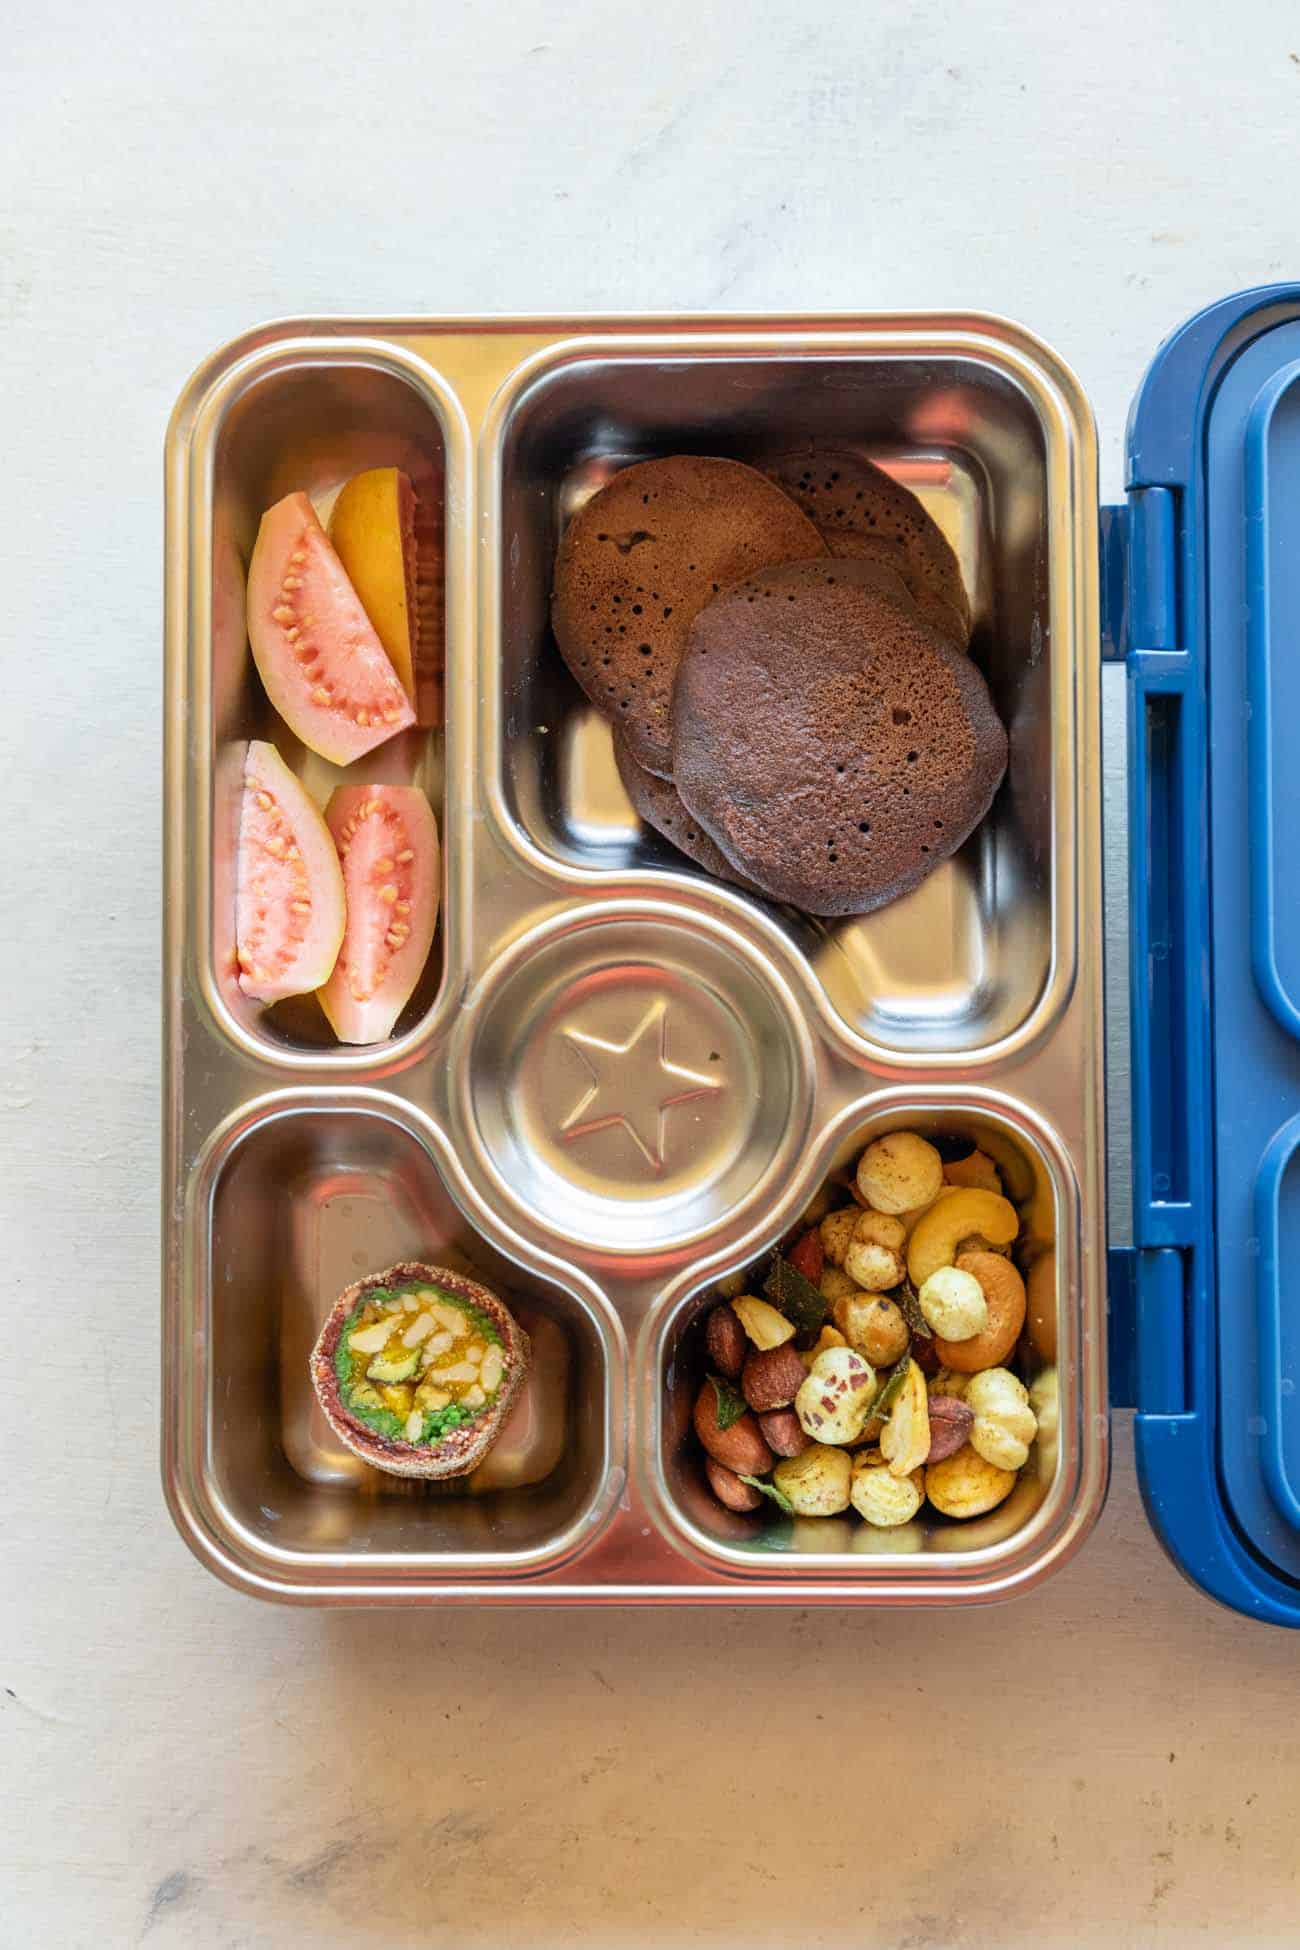 Picture of lunch box with ragi pancakes, guava, roasted makhanas and mithai